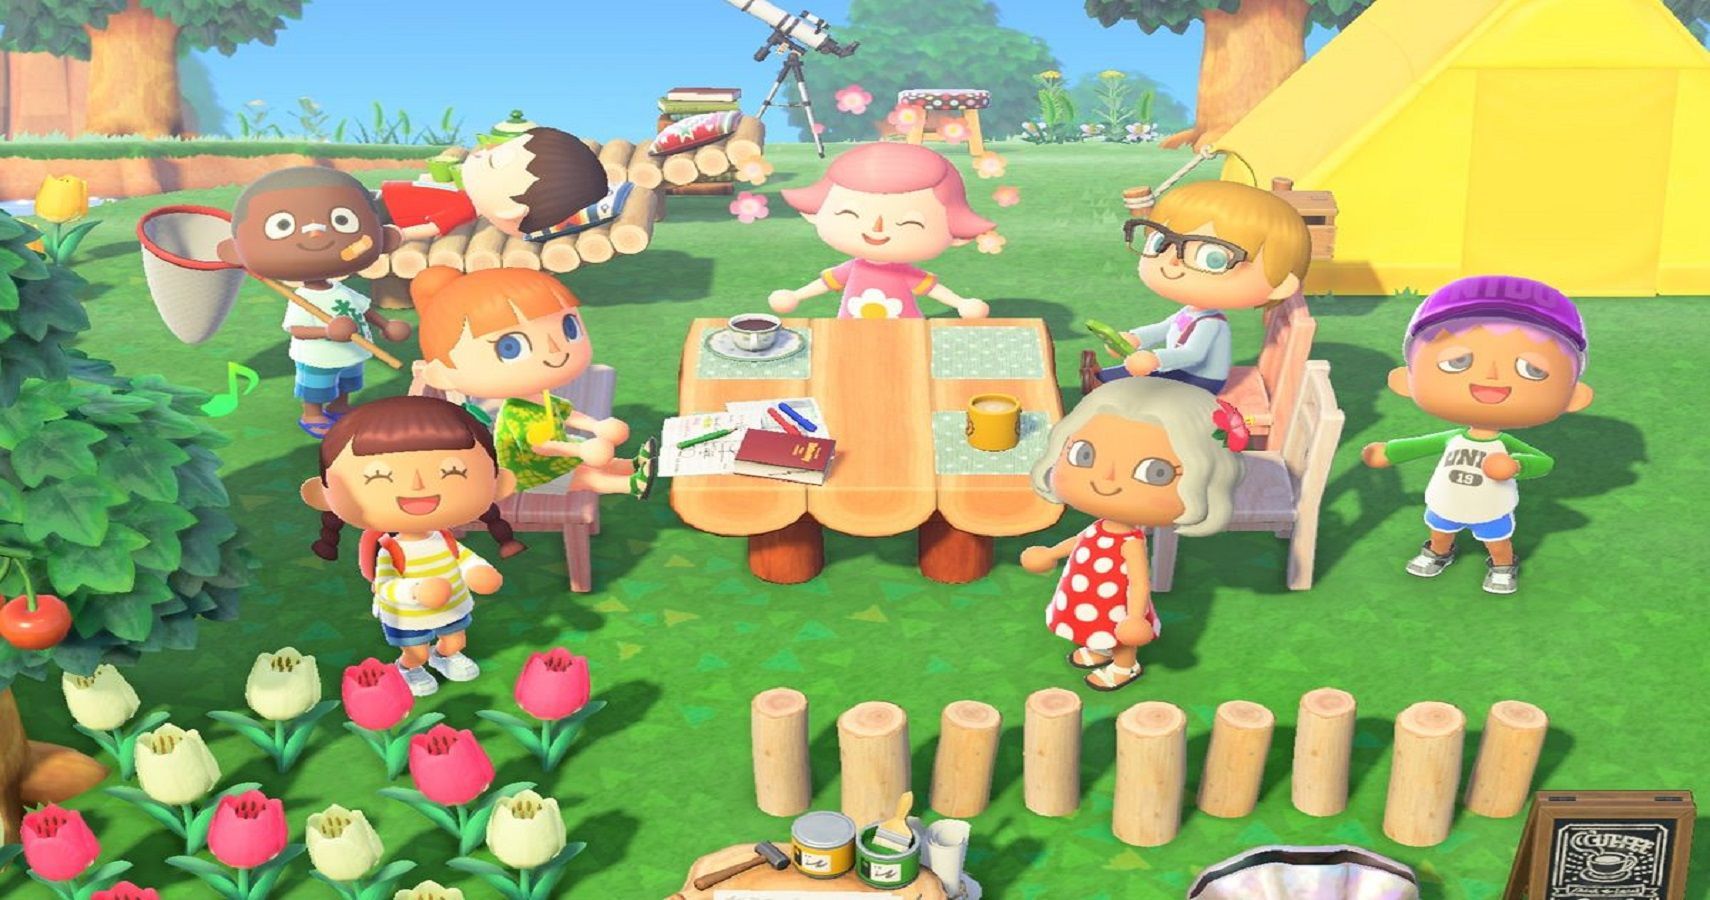 Animal Crossing players are returning to the perfect 